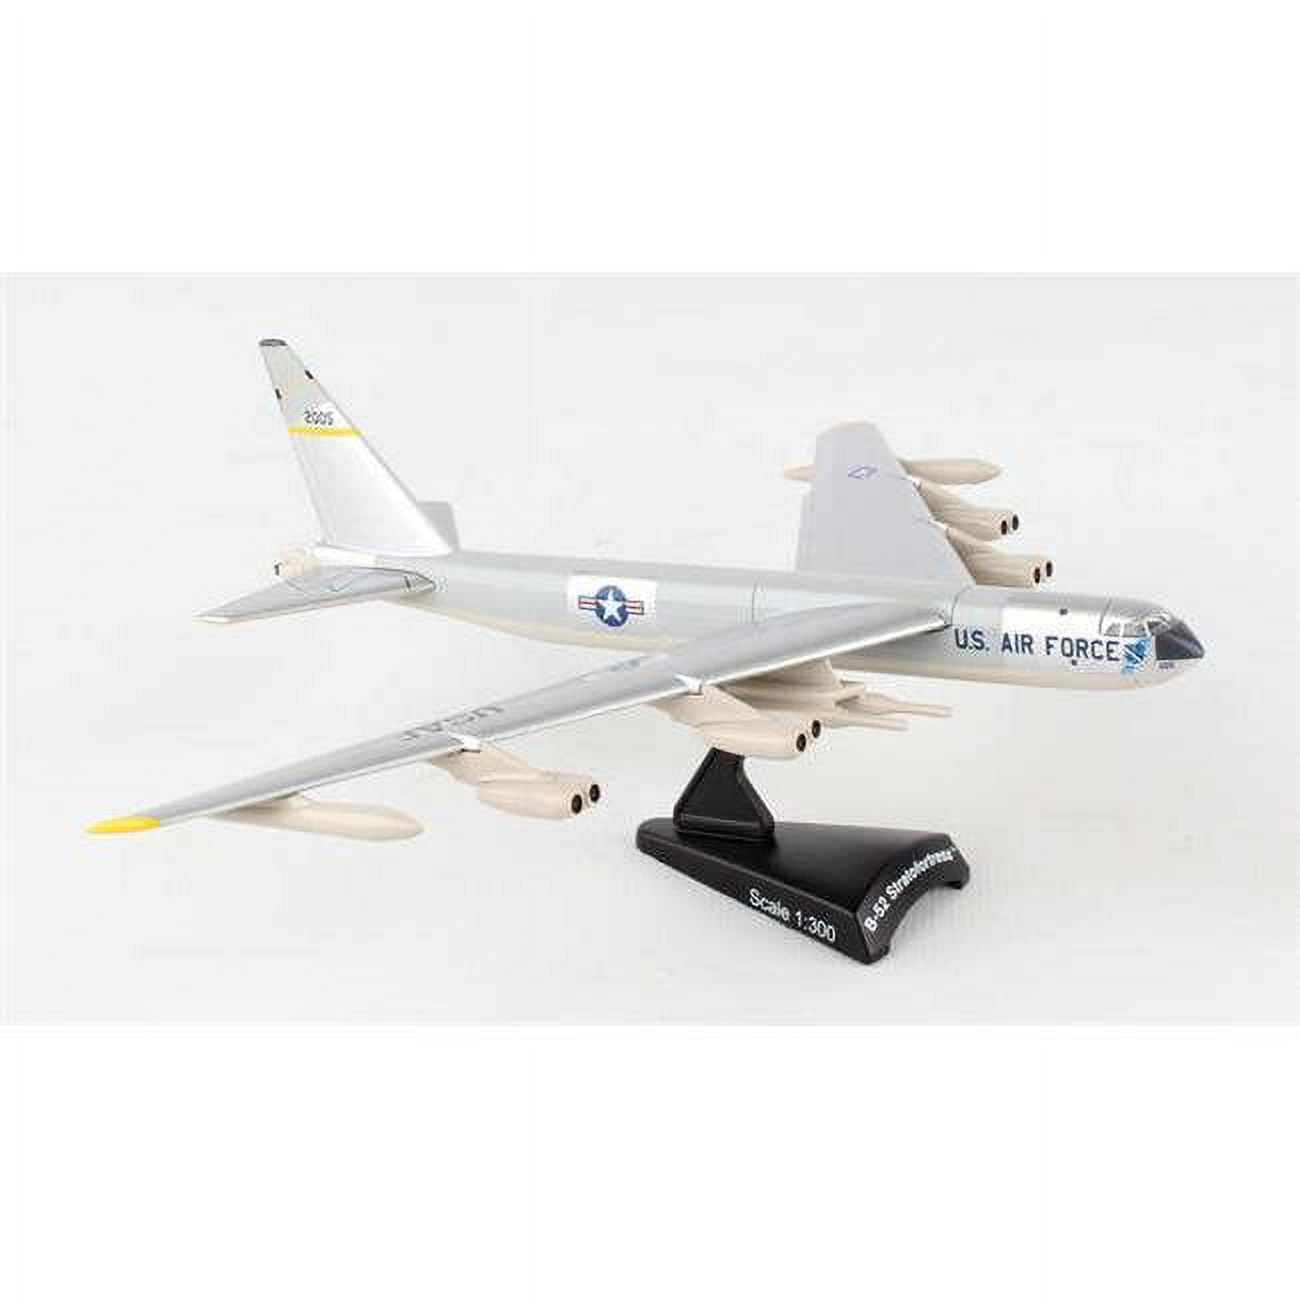 Picture of Postage Stamp Planes PS5391-2 1 isto 300 USAF B-52 Stratofortress Model Airplane